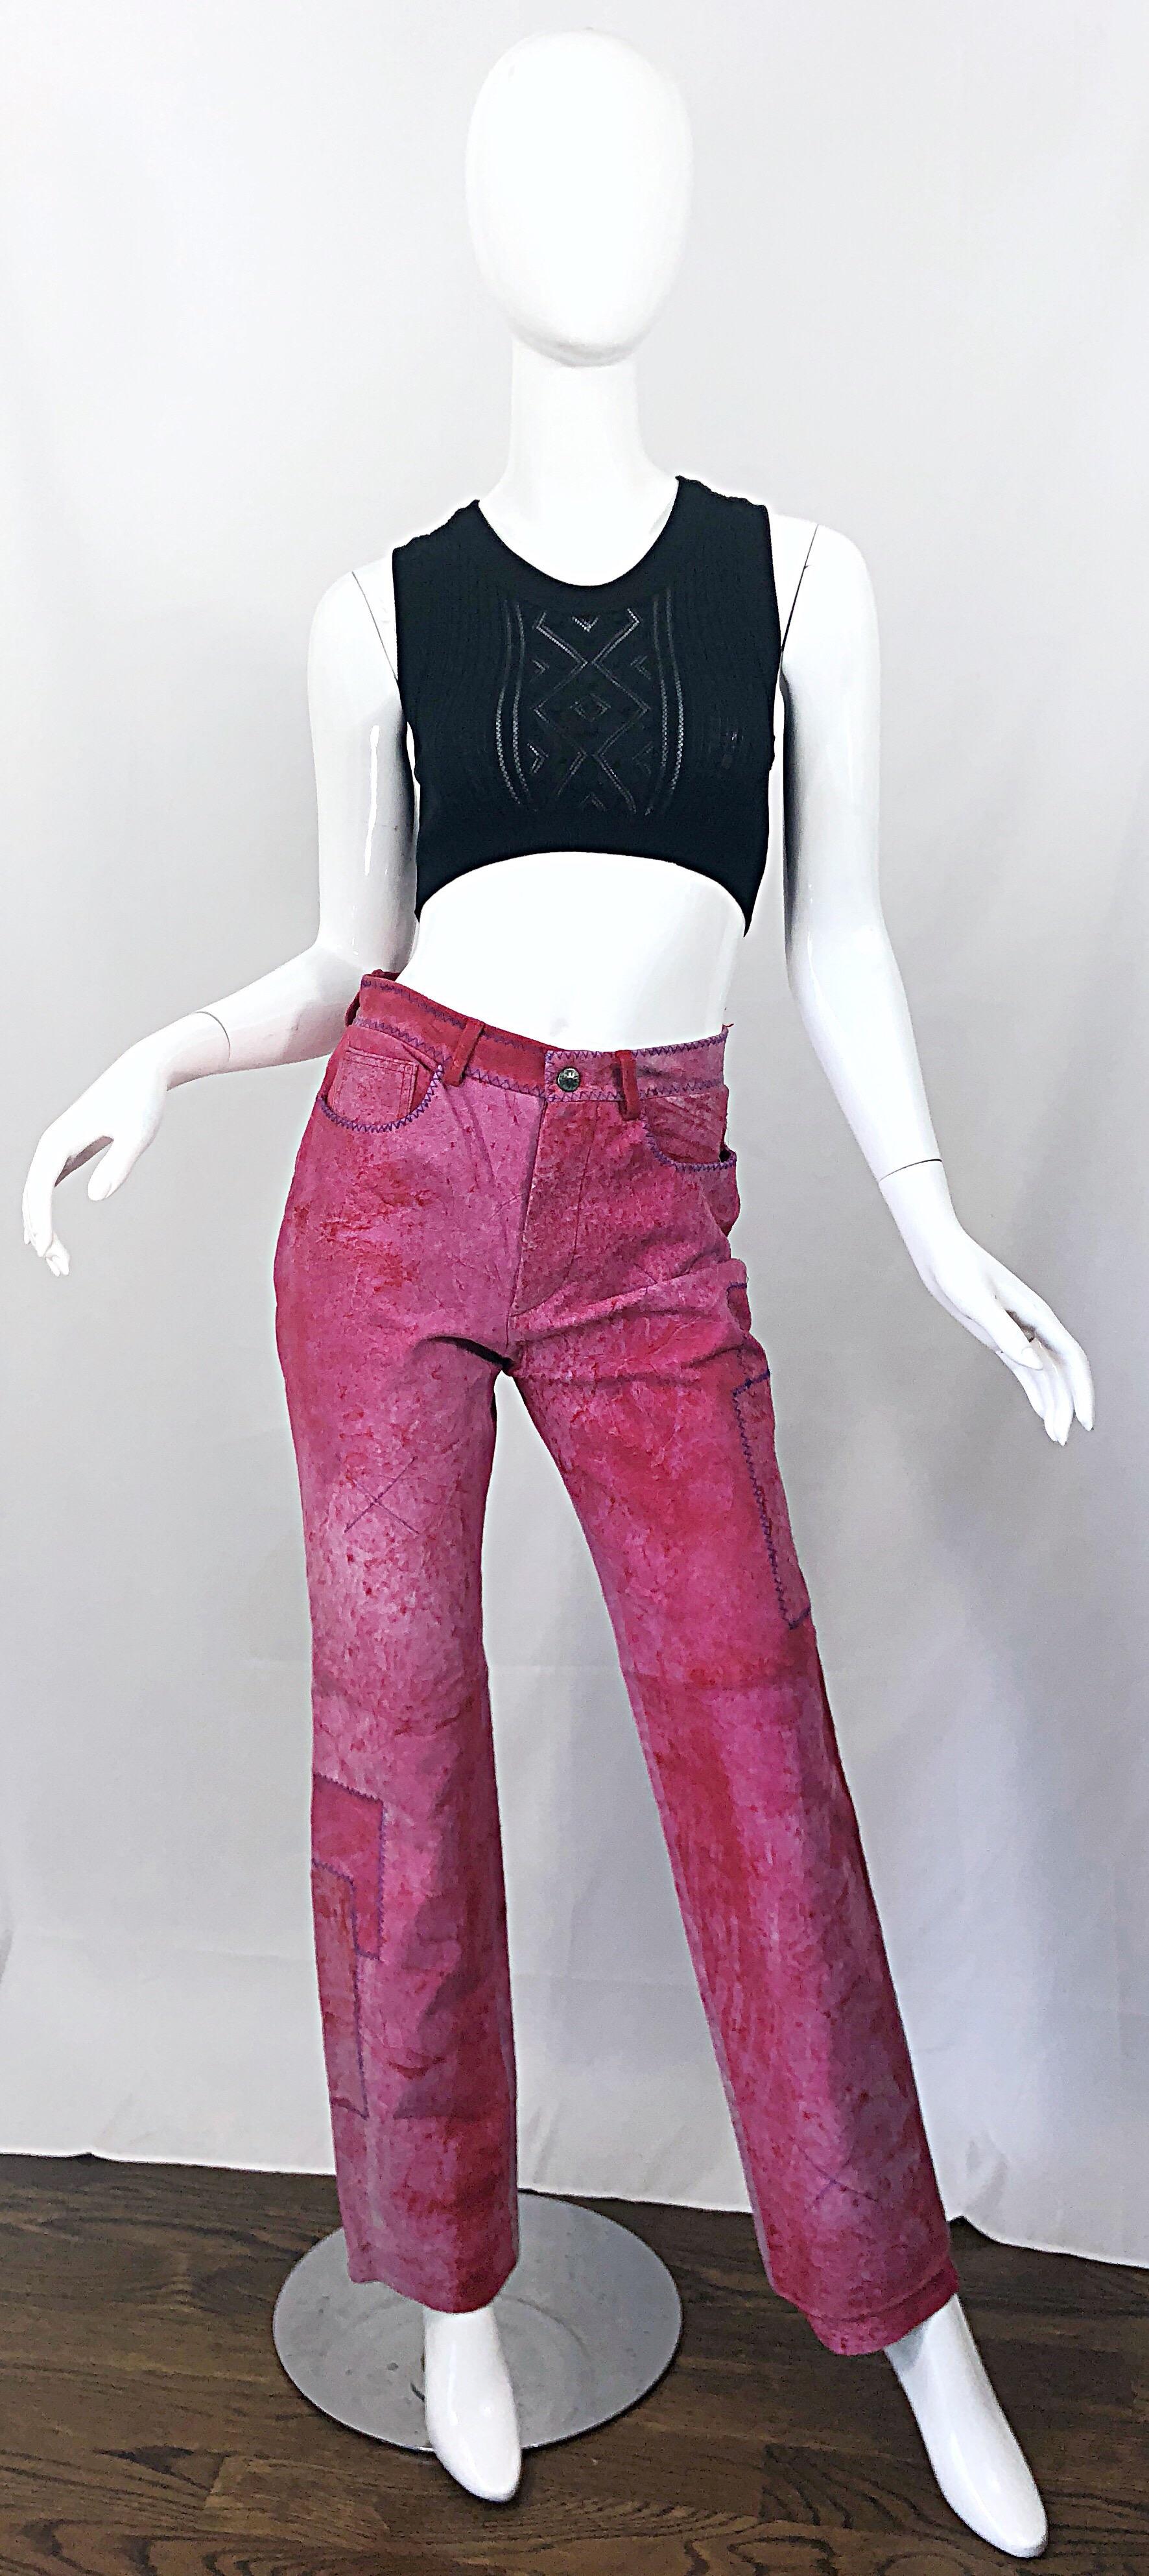 New with tag early 1990s ROME GIGLI hot pink / fuchsia and purple distressed suede leather patchwork high waisted pants! This rare pair of trousers retailed for $1,500 around 1990, which is equivalent to nearly $3,000 today. Features a flattering